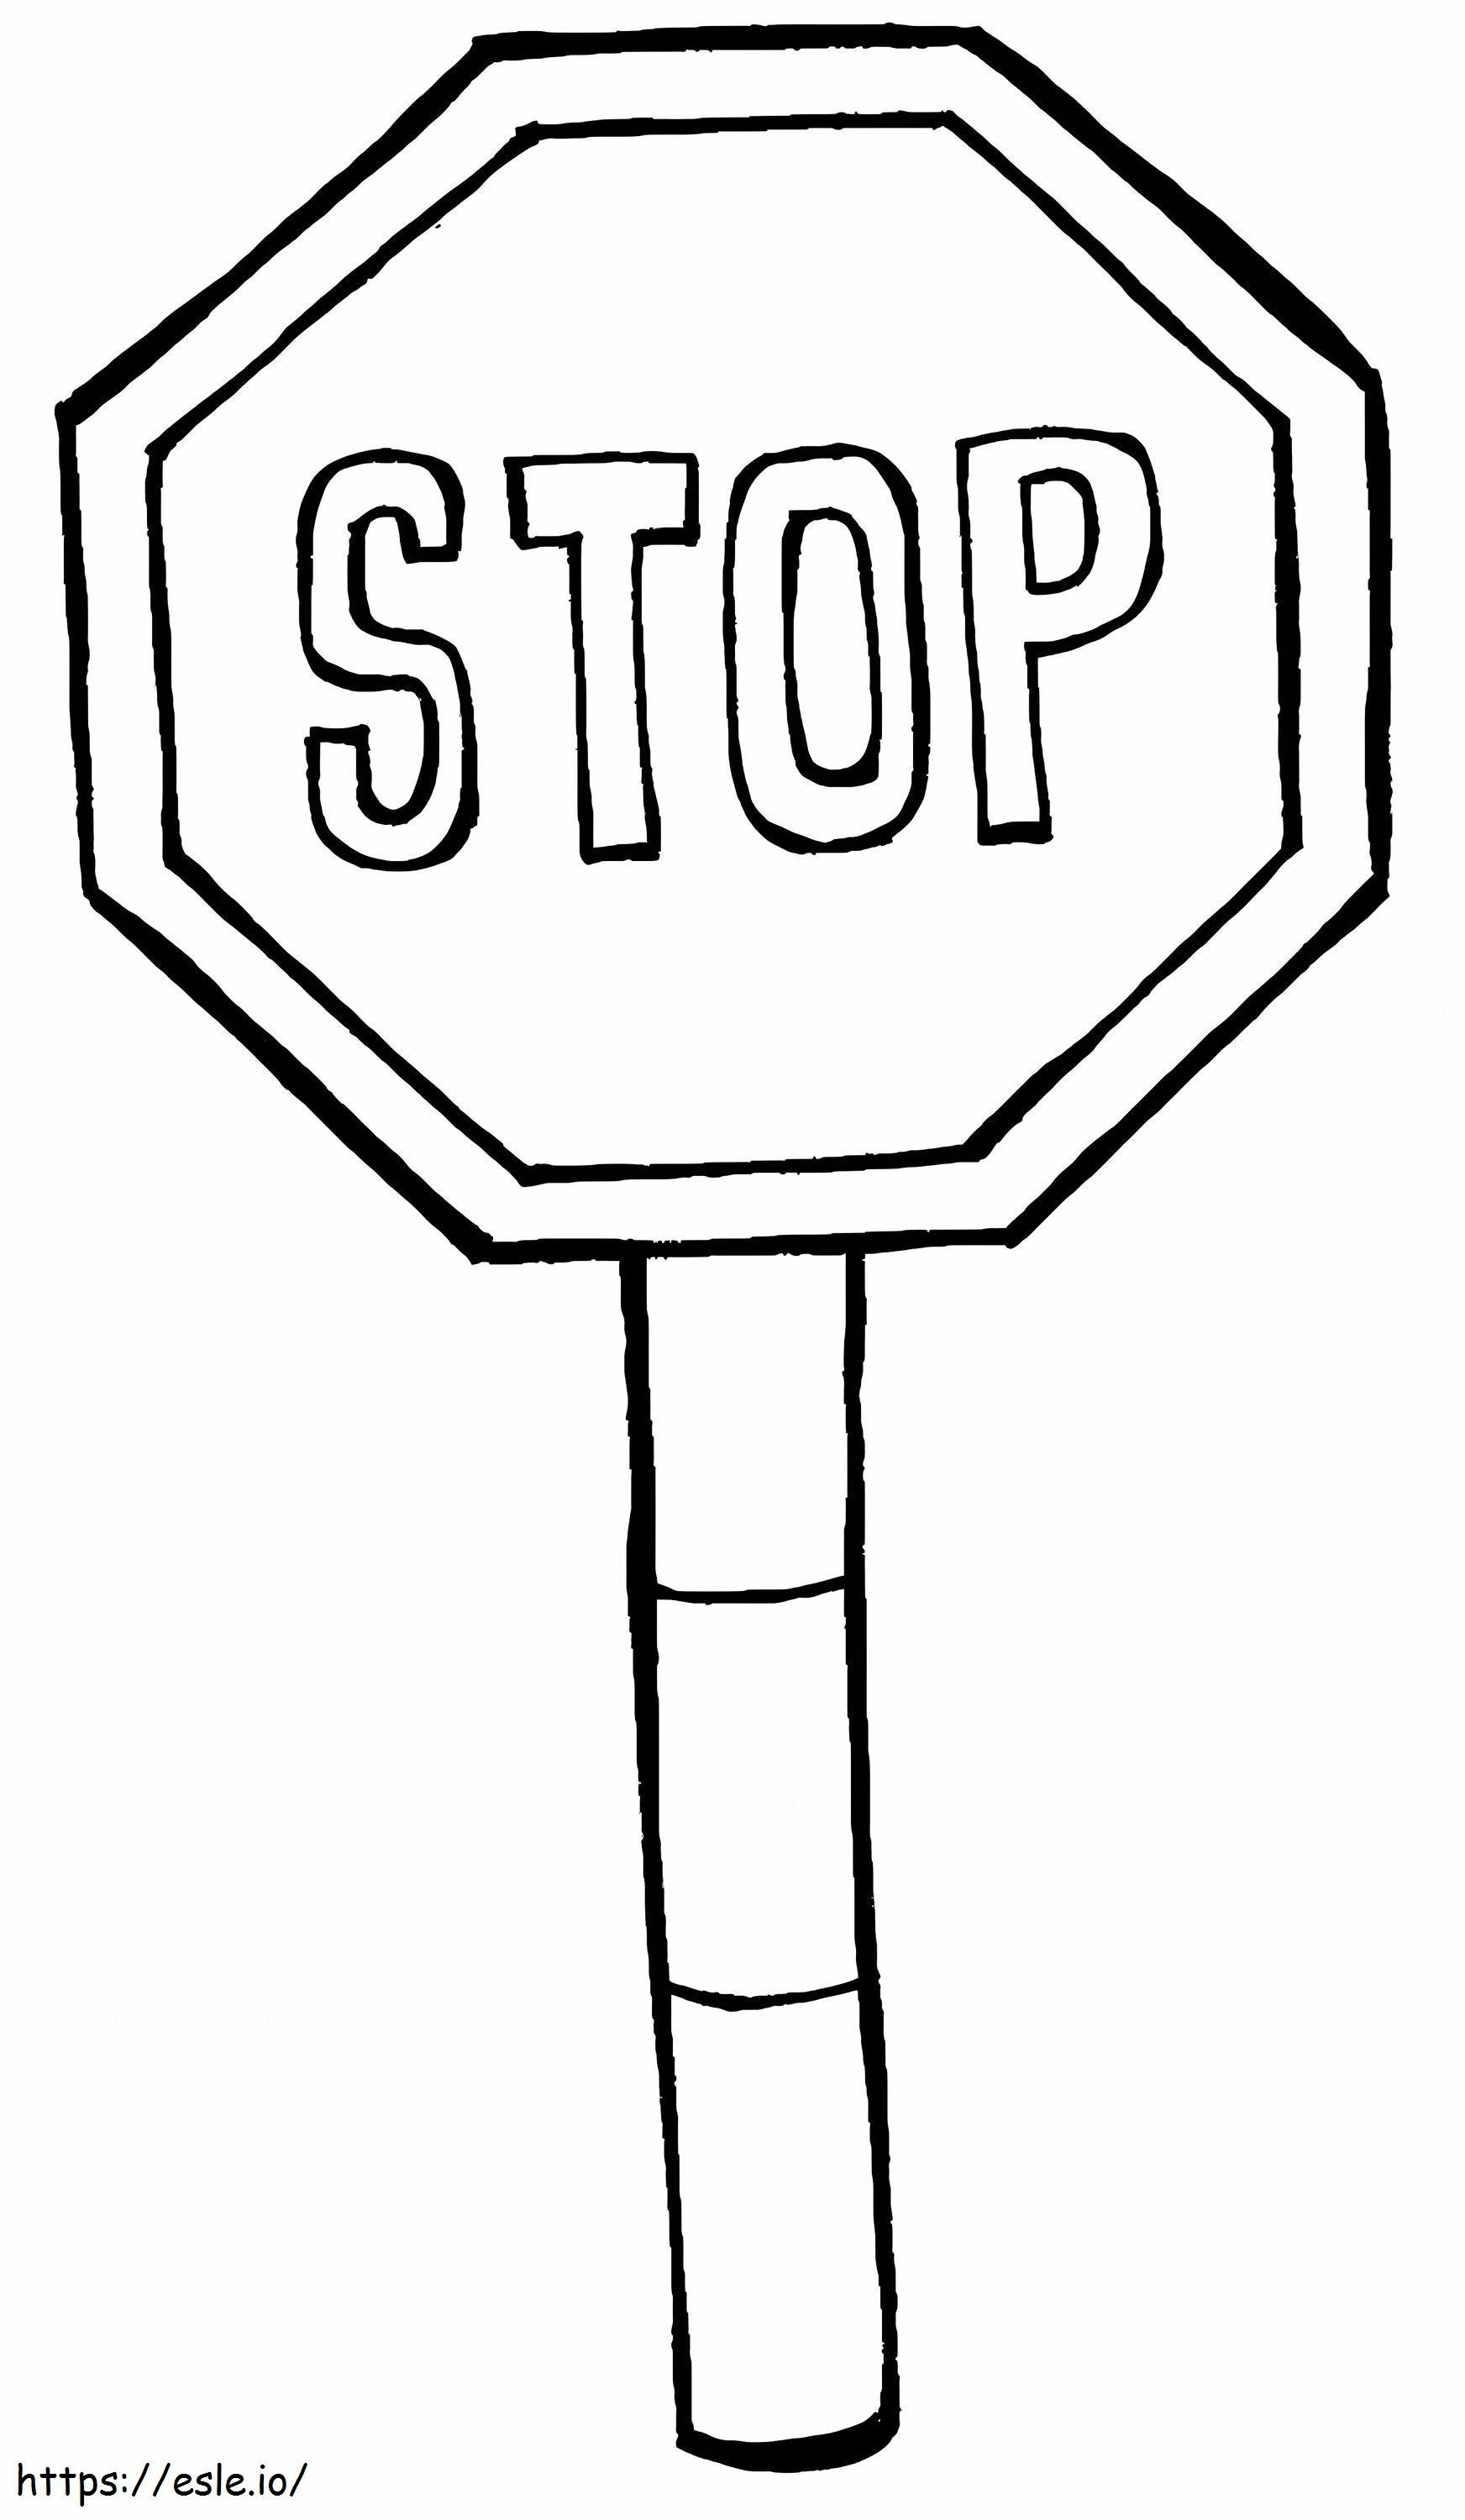 Stop Sign 5 coloring page